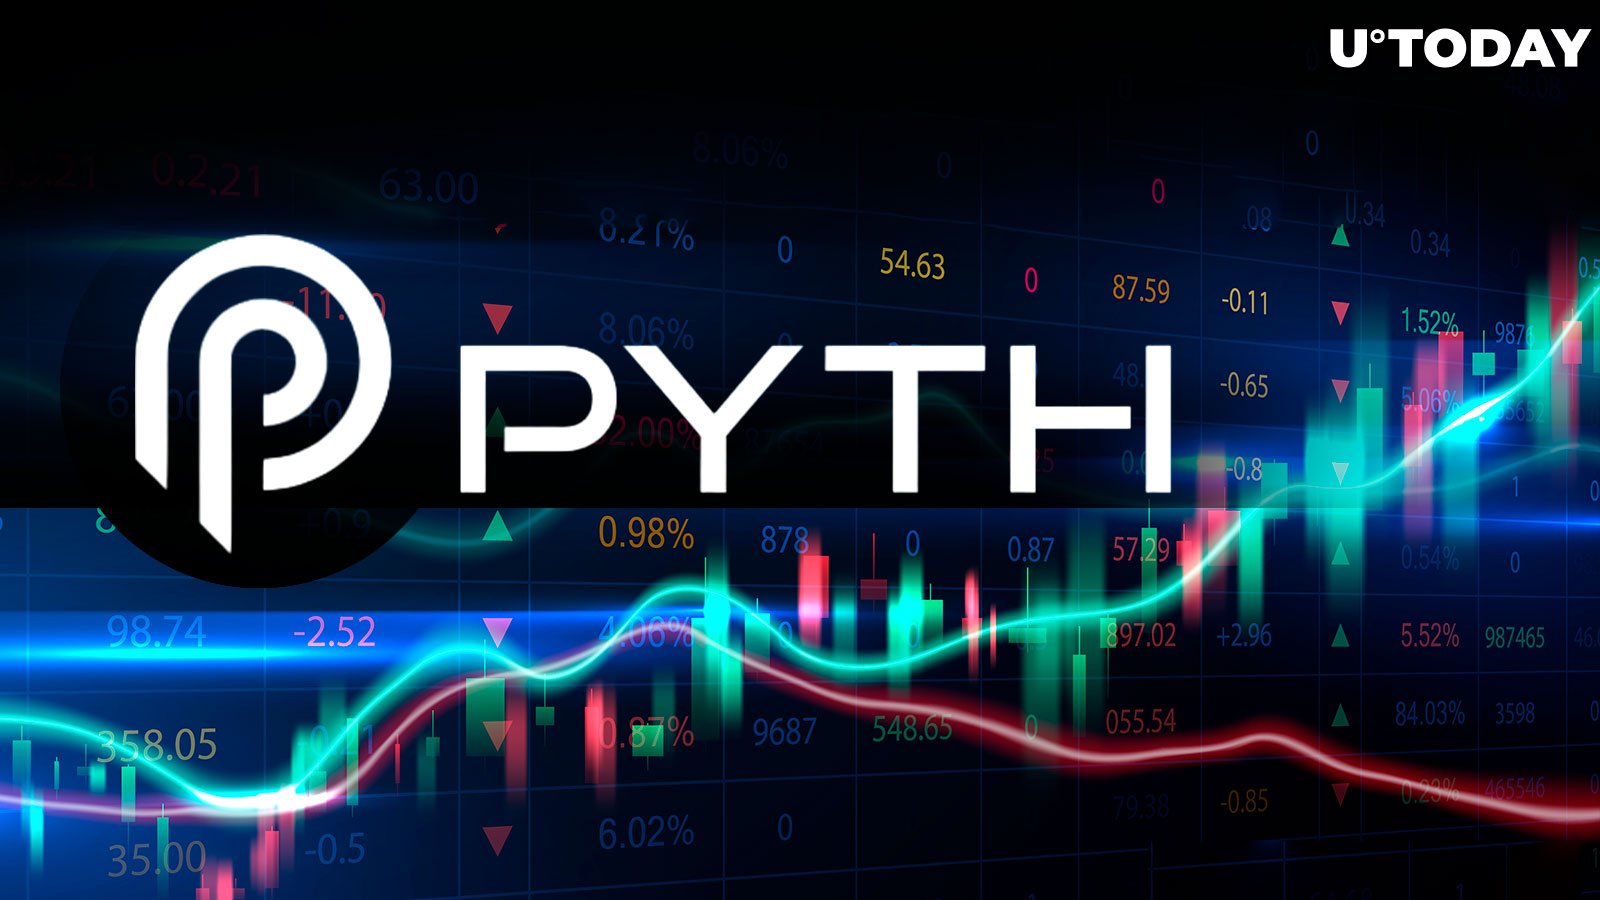 Solana-Based Pyth Network (PYTH) Surges Over 20% After Major Listing